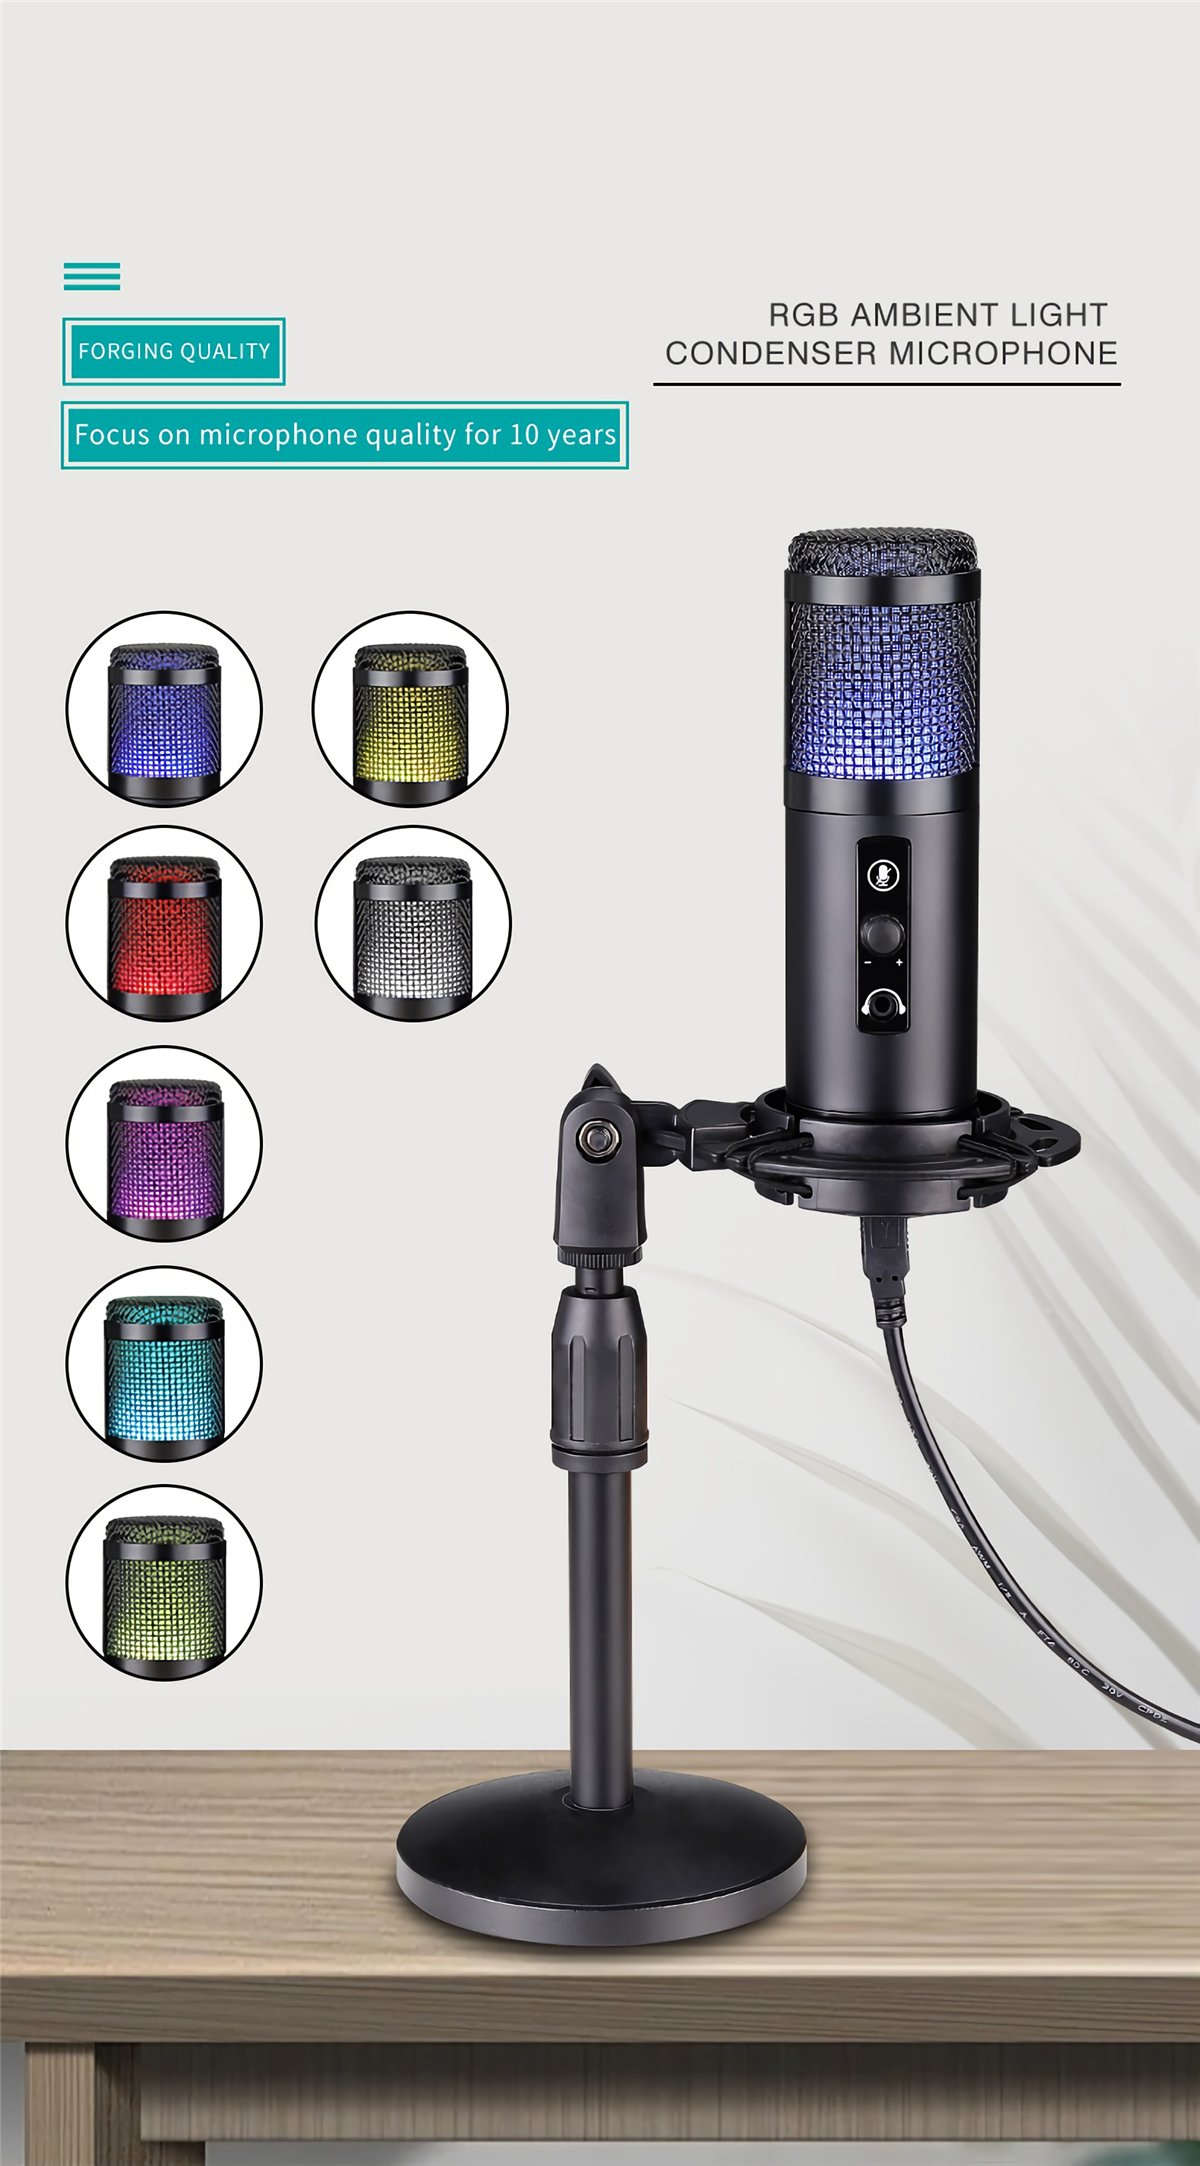 CEOK-K04-Condenser-Microphone-Kit-USB-Wired-Cardioid-directional-RGB-Dynamic-Light-Audio-Sound-Recor-1899444-1